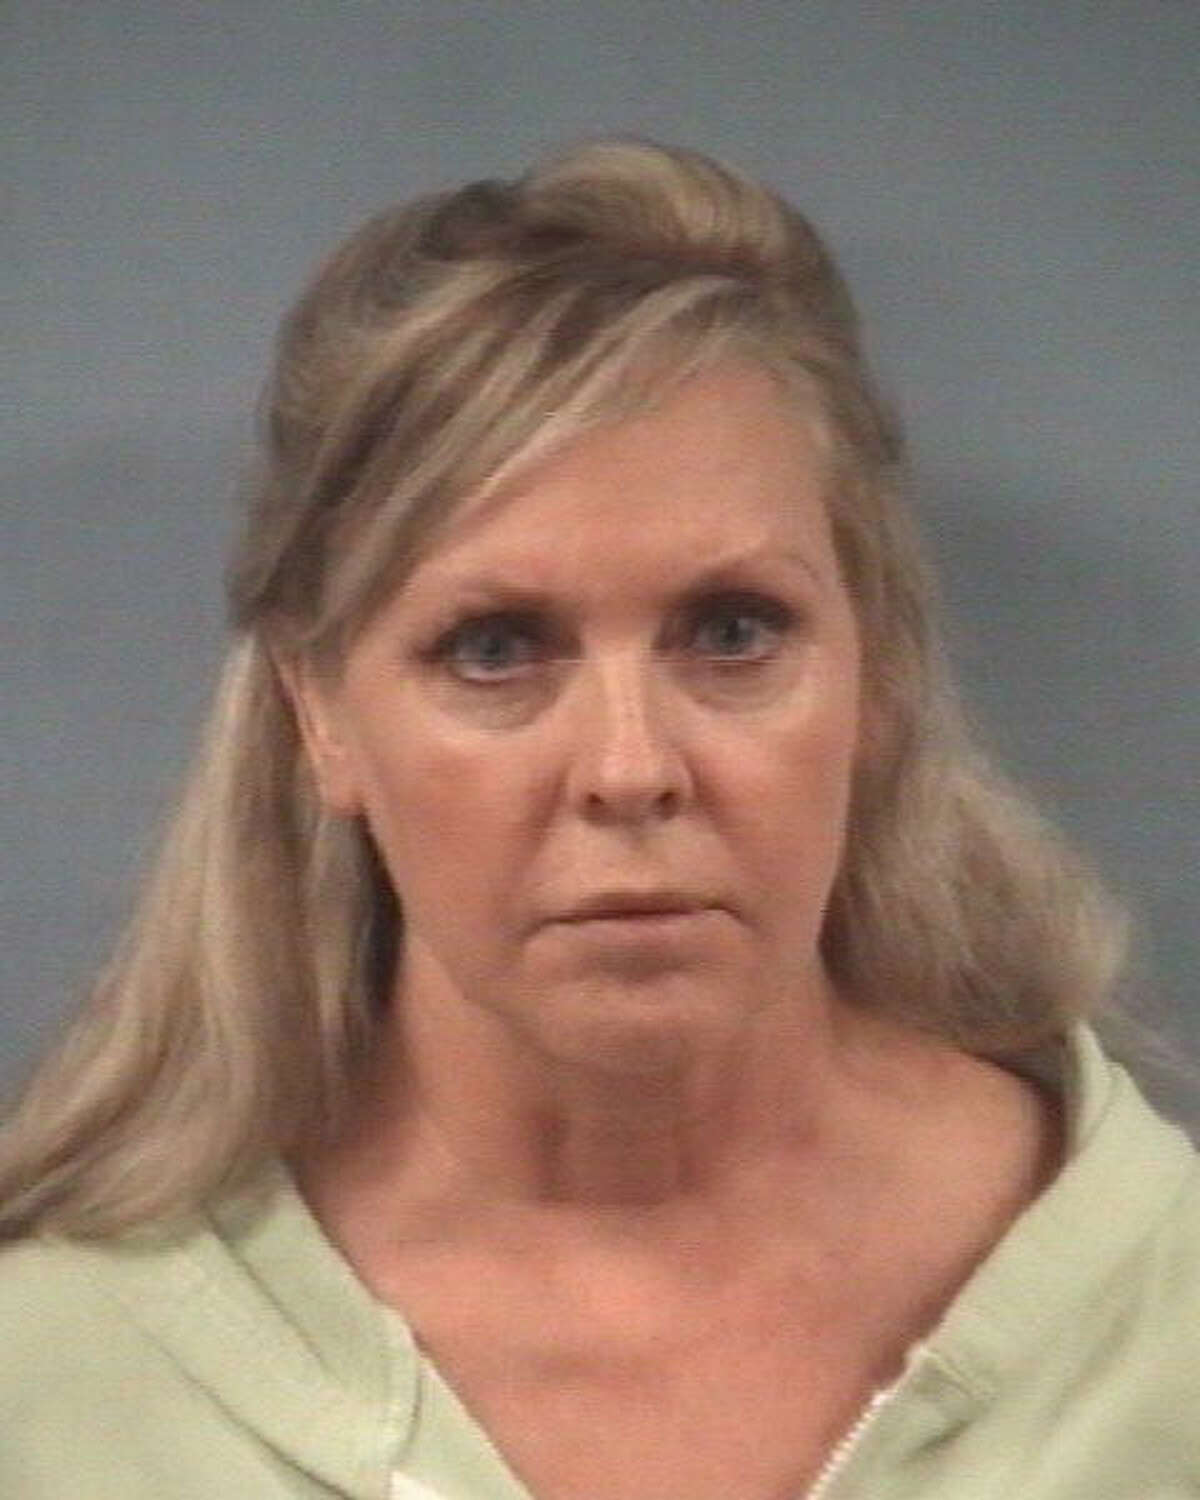 Kelly Meadows Kennedy, 56, was charged with furnishing alcohol to minors and violating the open party ordinance.